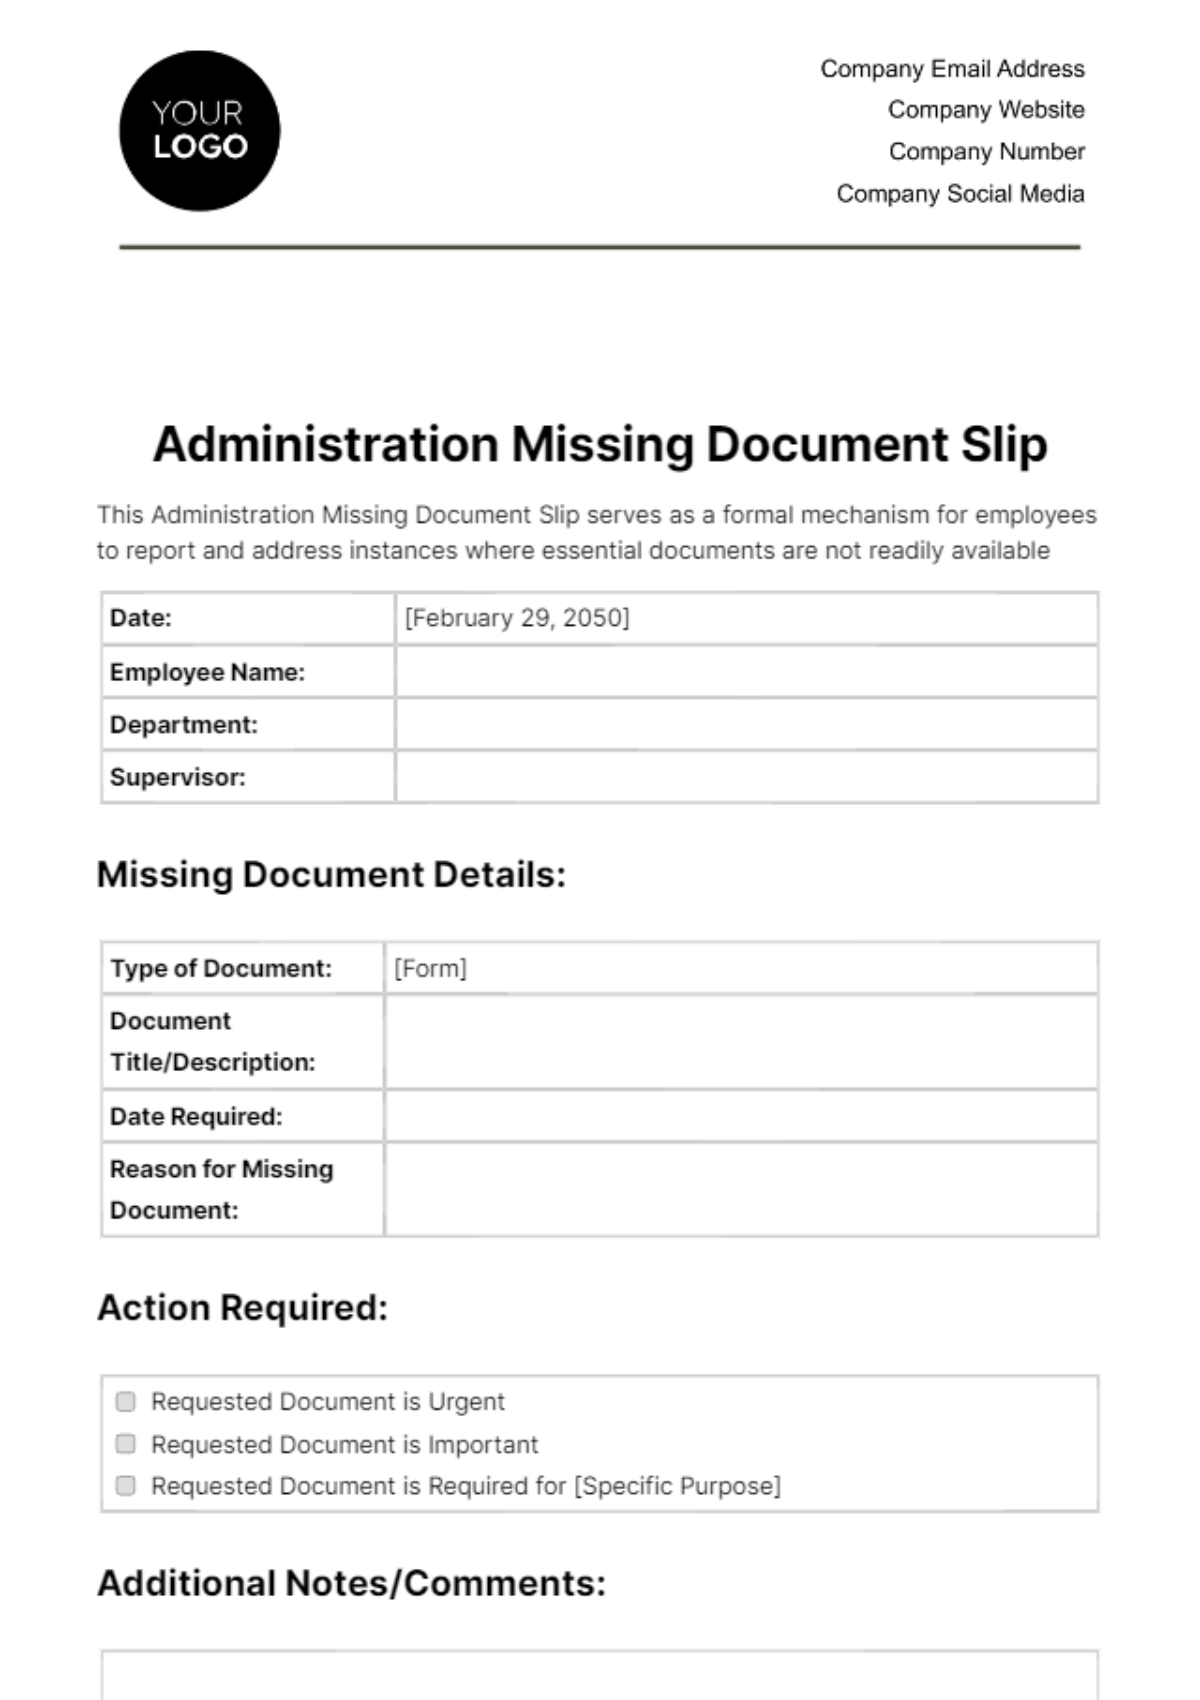 Free Administration Missing Document Slip Template